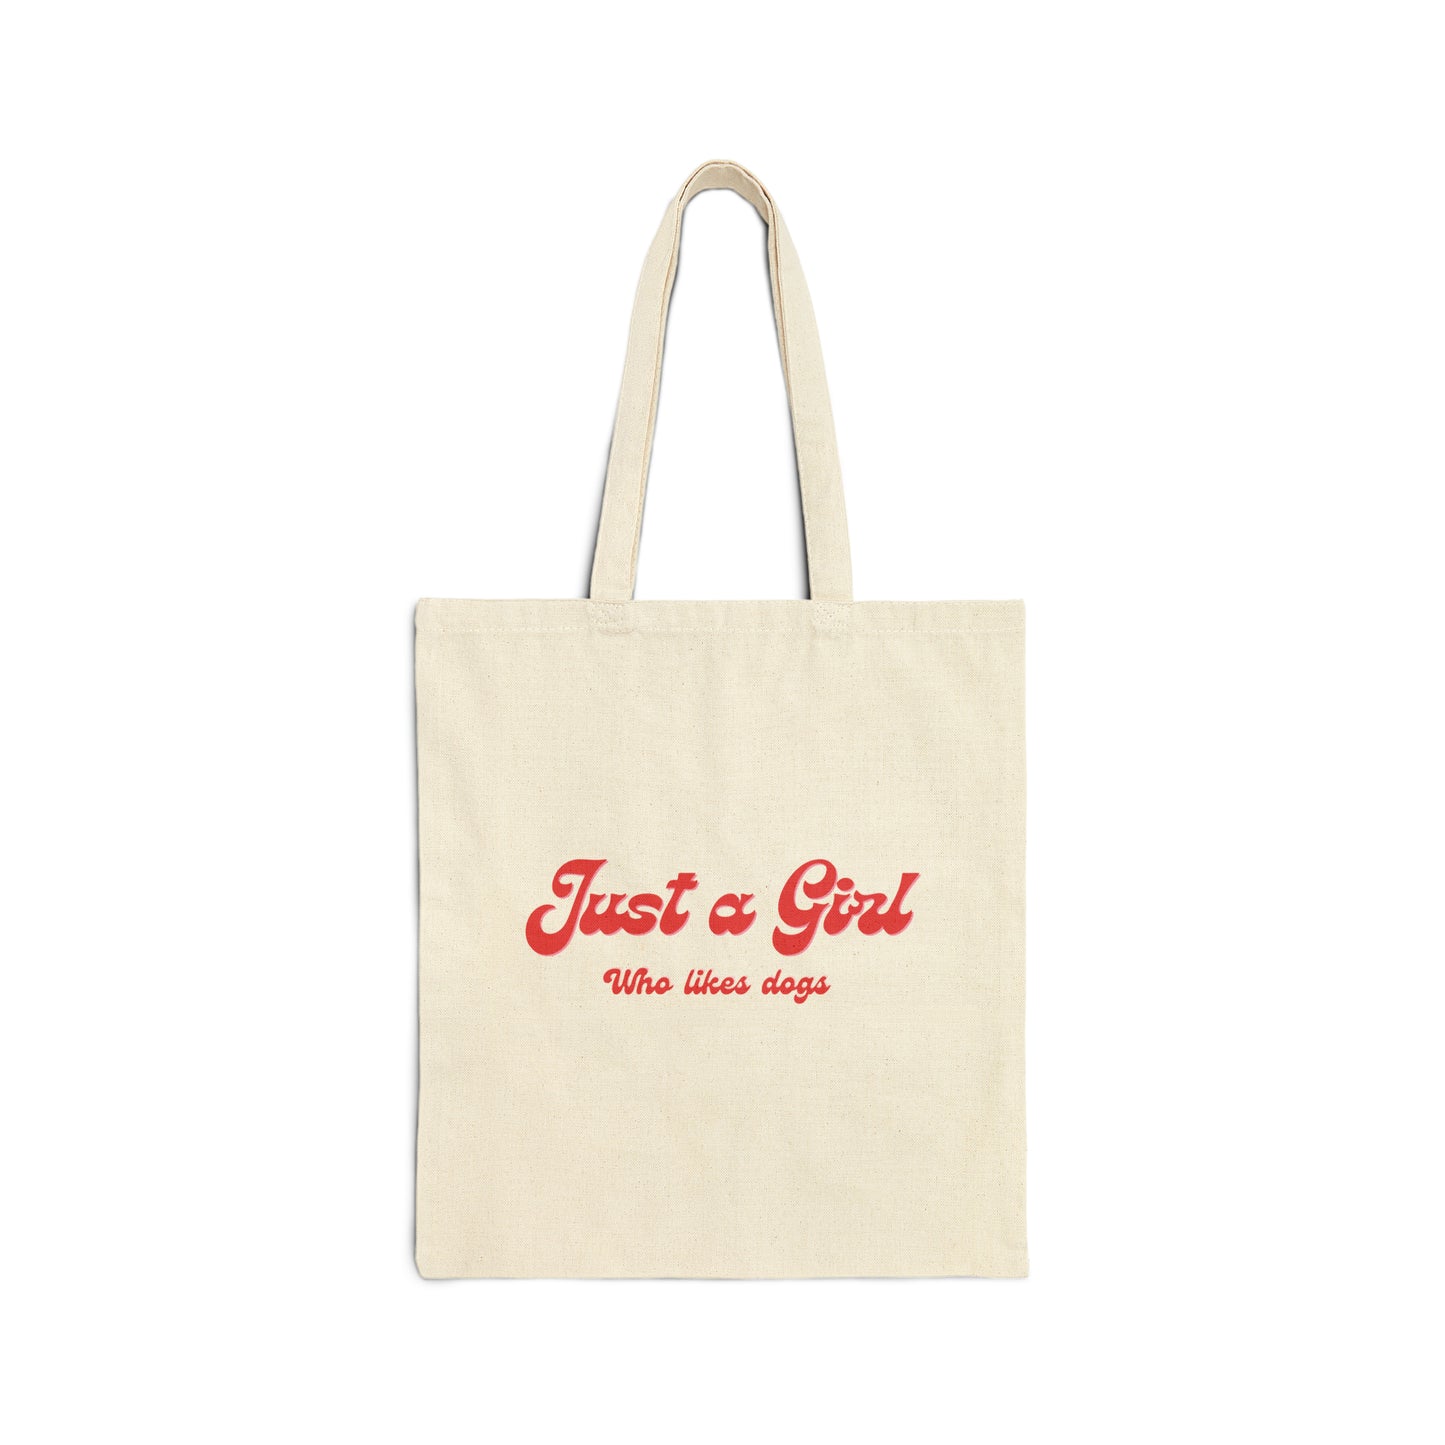 Just a Girl Tote Bag